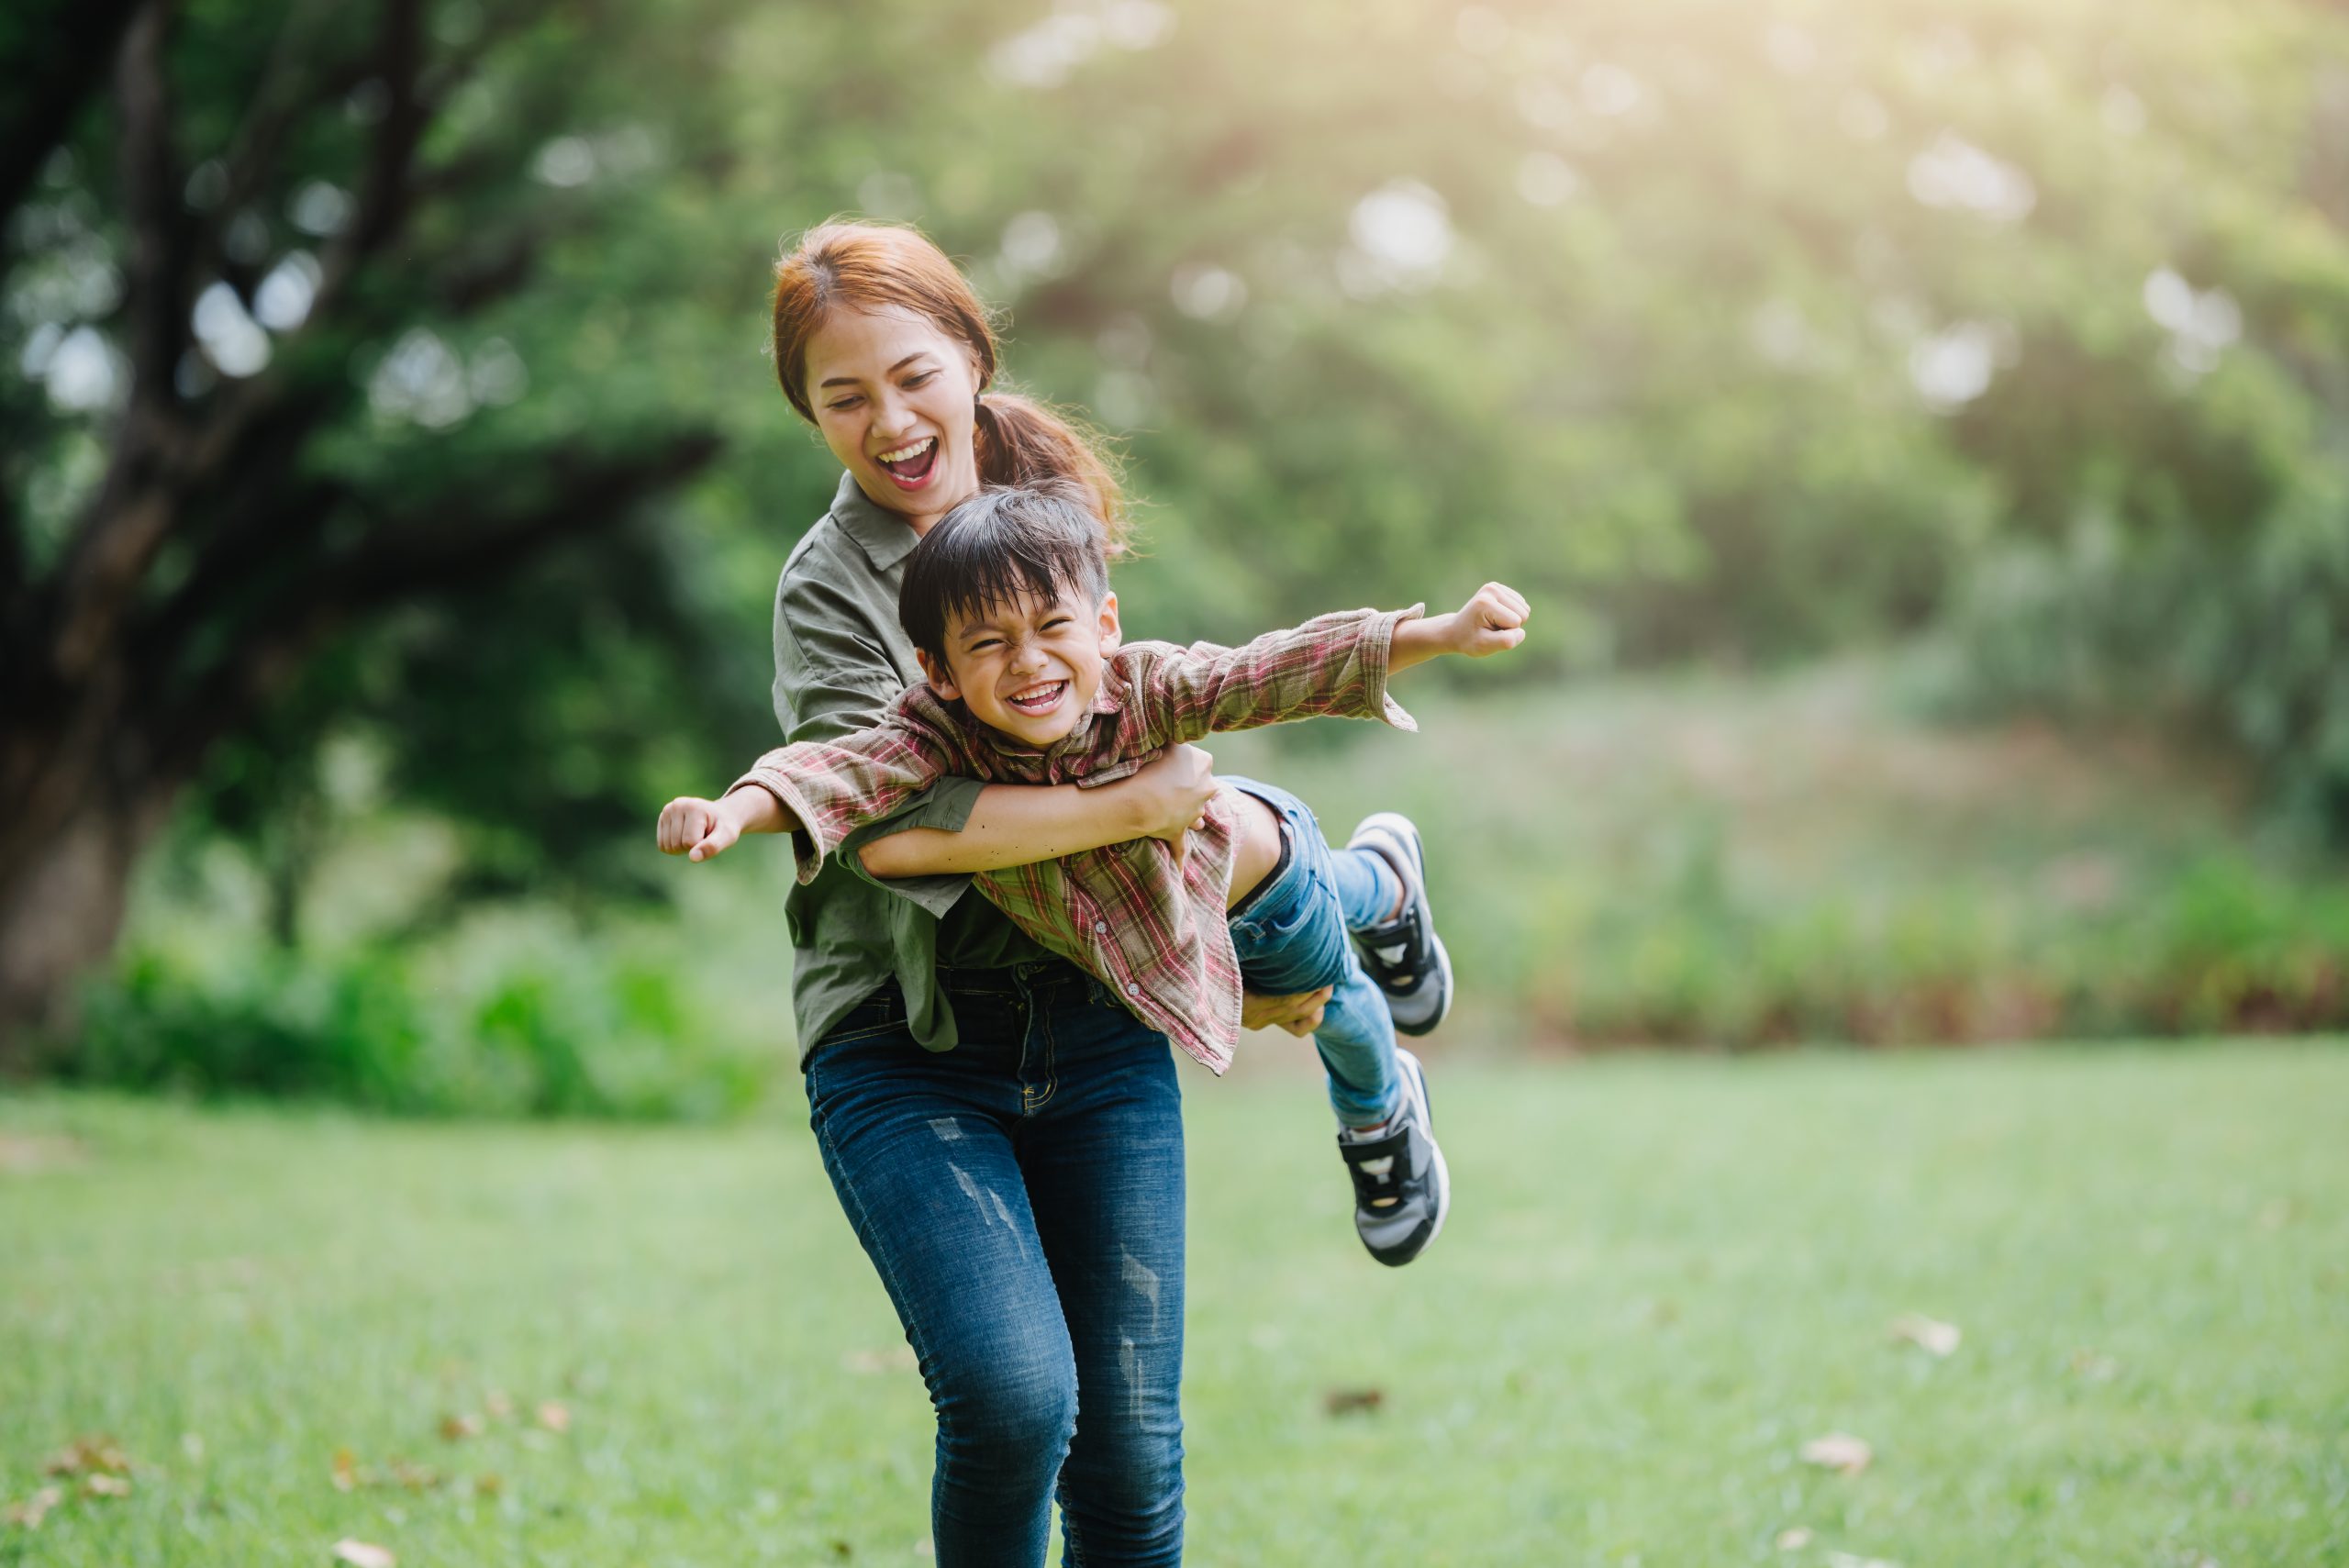 10 Healthy Mother’s Day Activities for the Whole Family